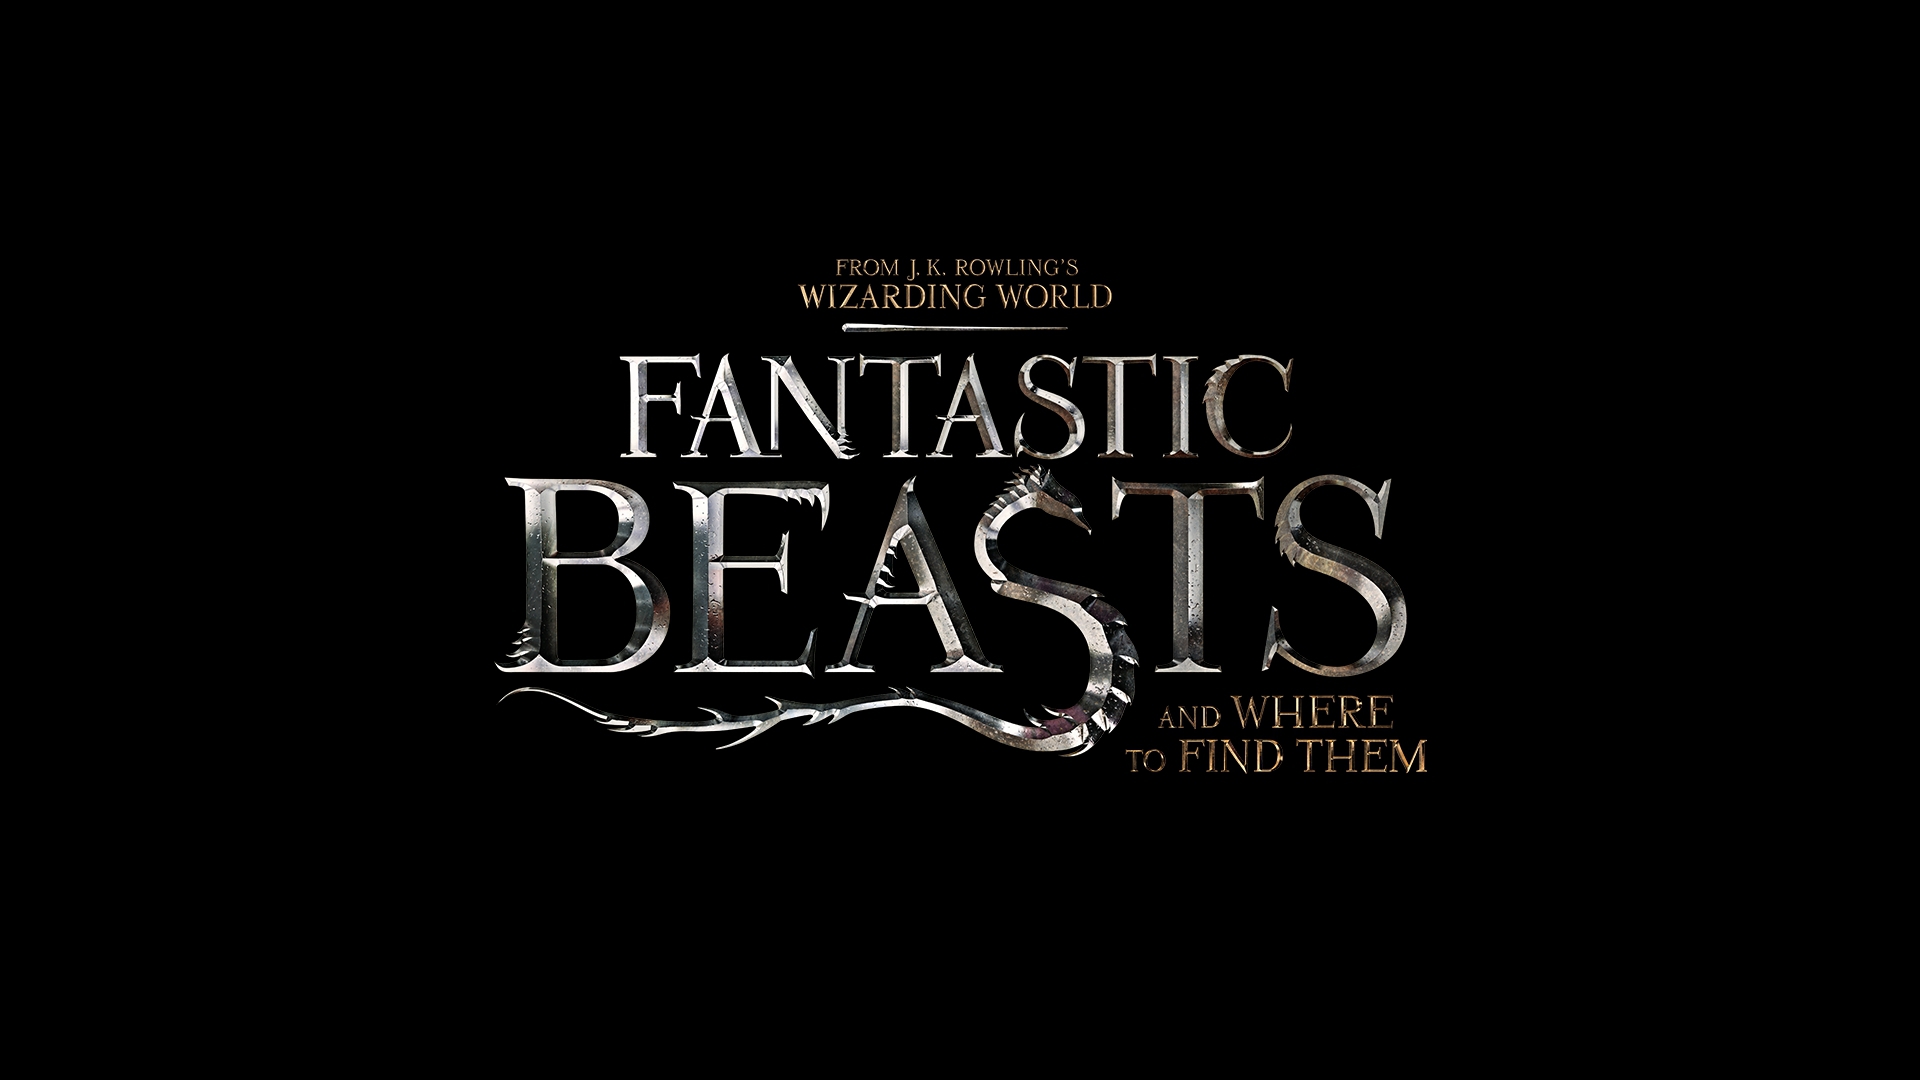 2016 Full HD Fantastic Beasts And Where To Find Them Watch Online